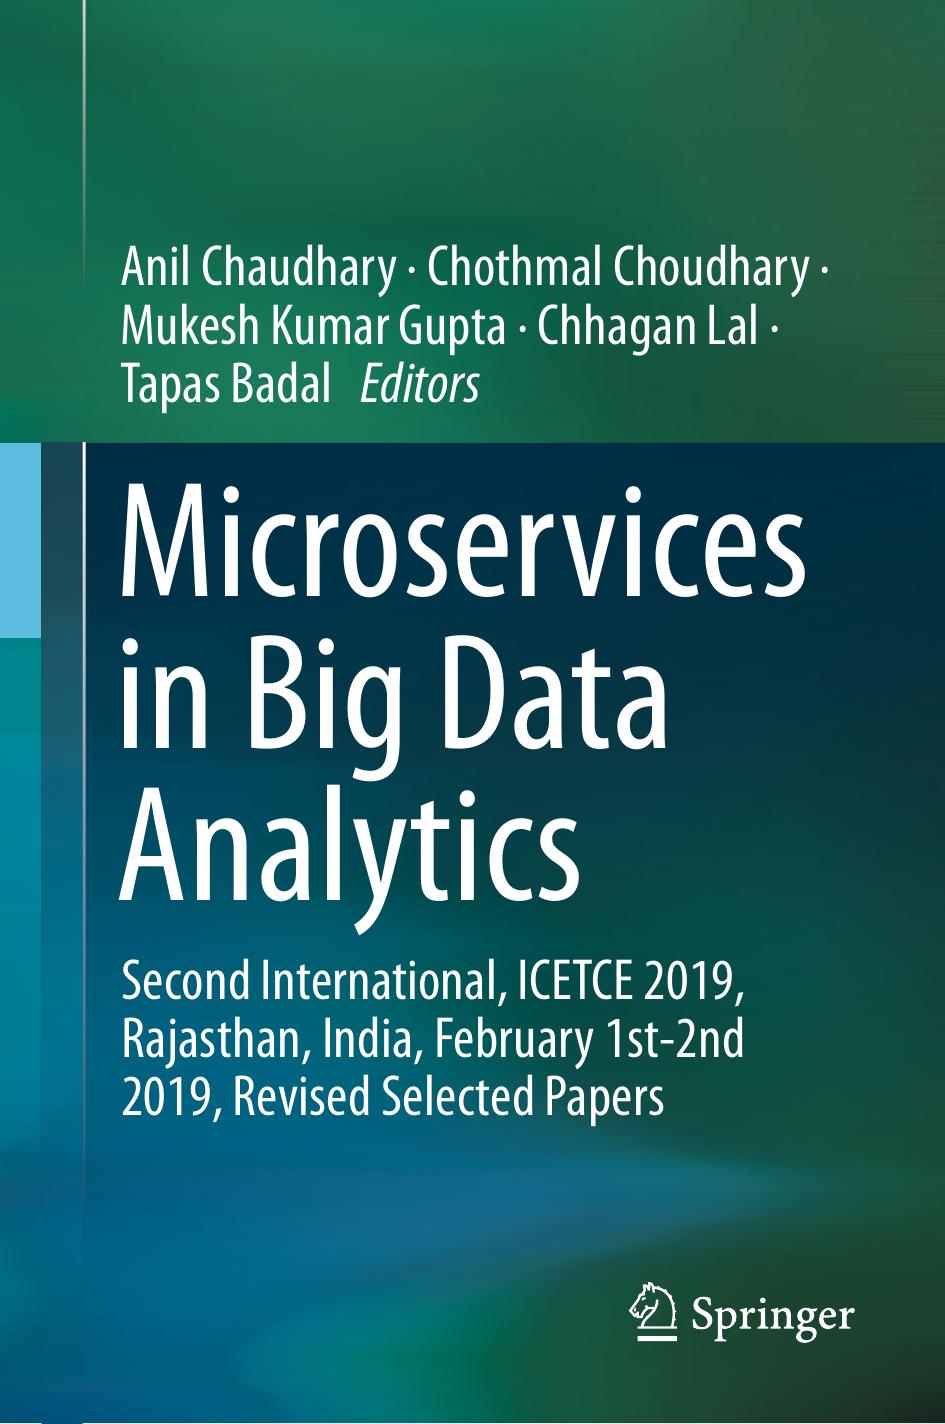 Microservices in Big Data Analytics: Second International, ICETCE 2019, Rajasthan, India, February 1st-2nd 2019, Revised Selected Papers